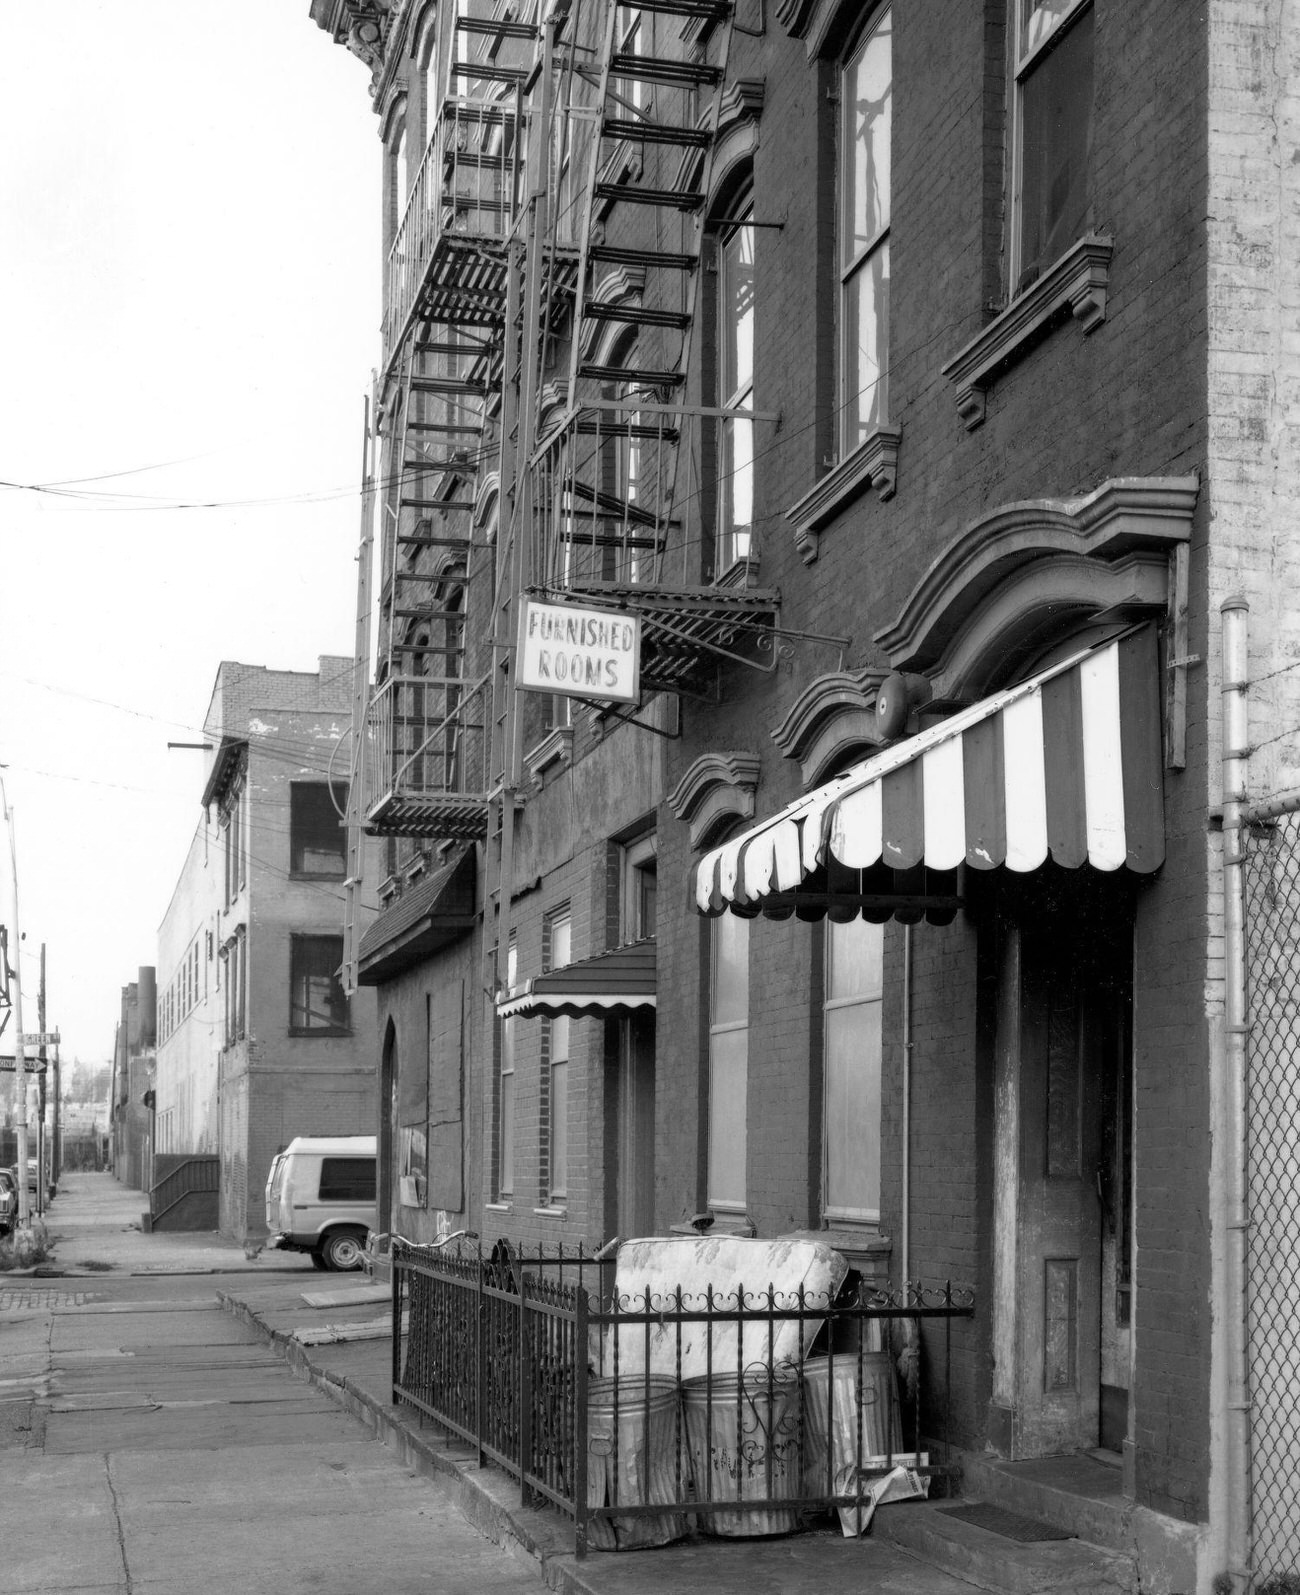 Boarding House With Furnished Rooms Sign In Greenpoint, Brooklyn, 1983.